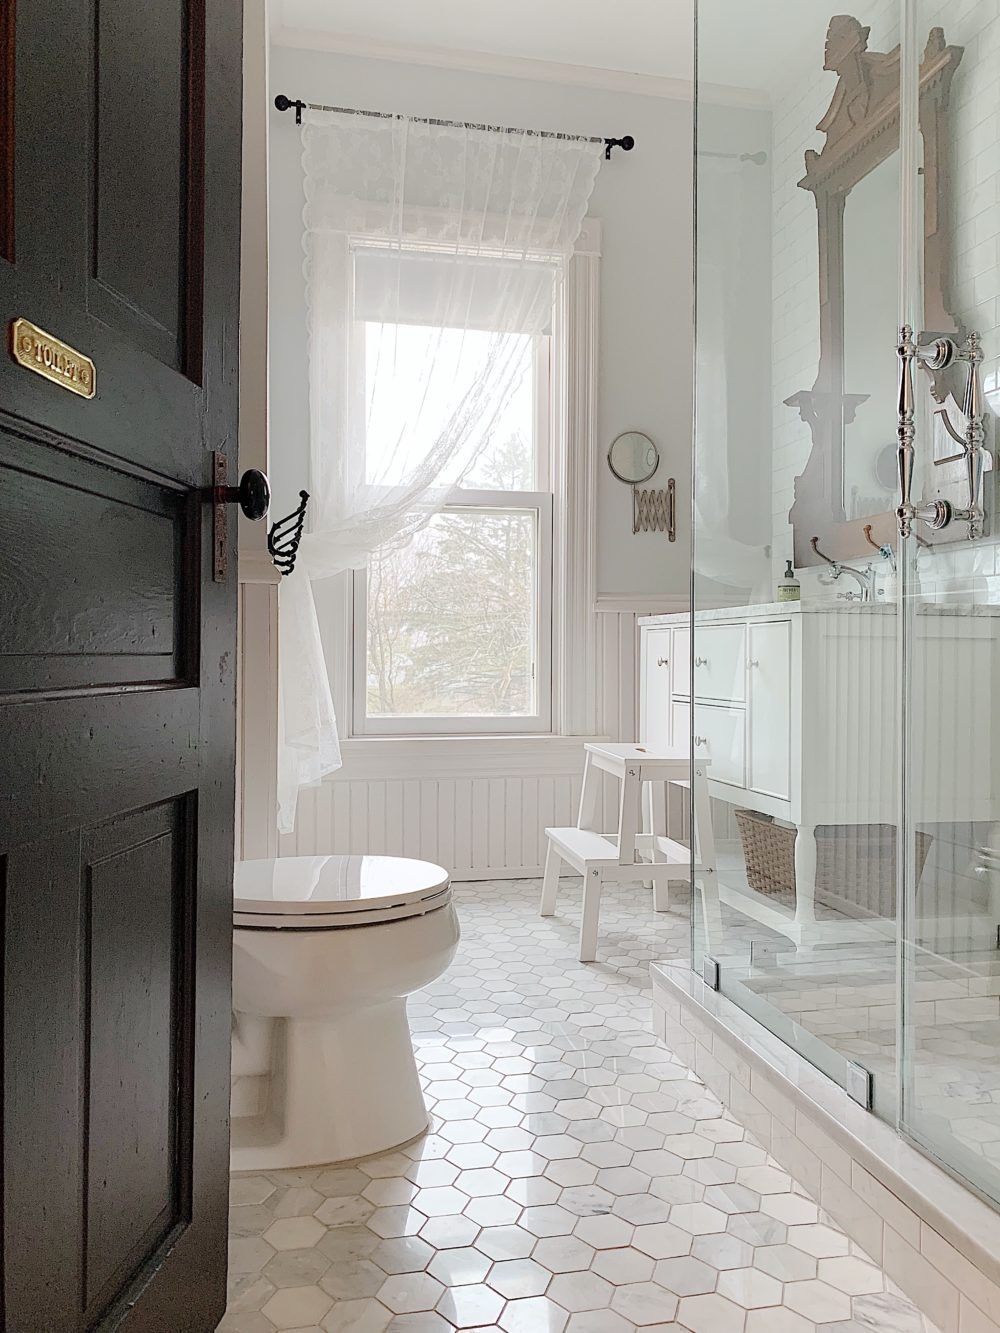 Lifestyle image of a Victorian style bathroom with white hexagonal floor tiles, a raised shower enclosure with chrome handles, a painted white vanity unit with marble worktop and a white lace curtain across the window